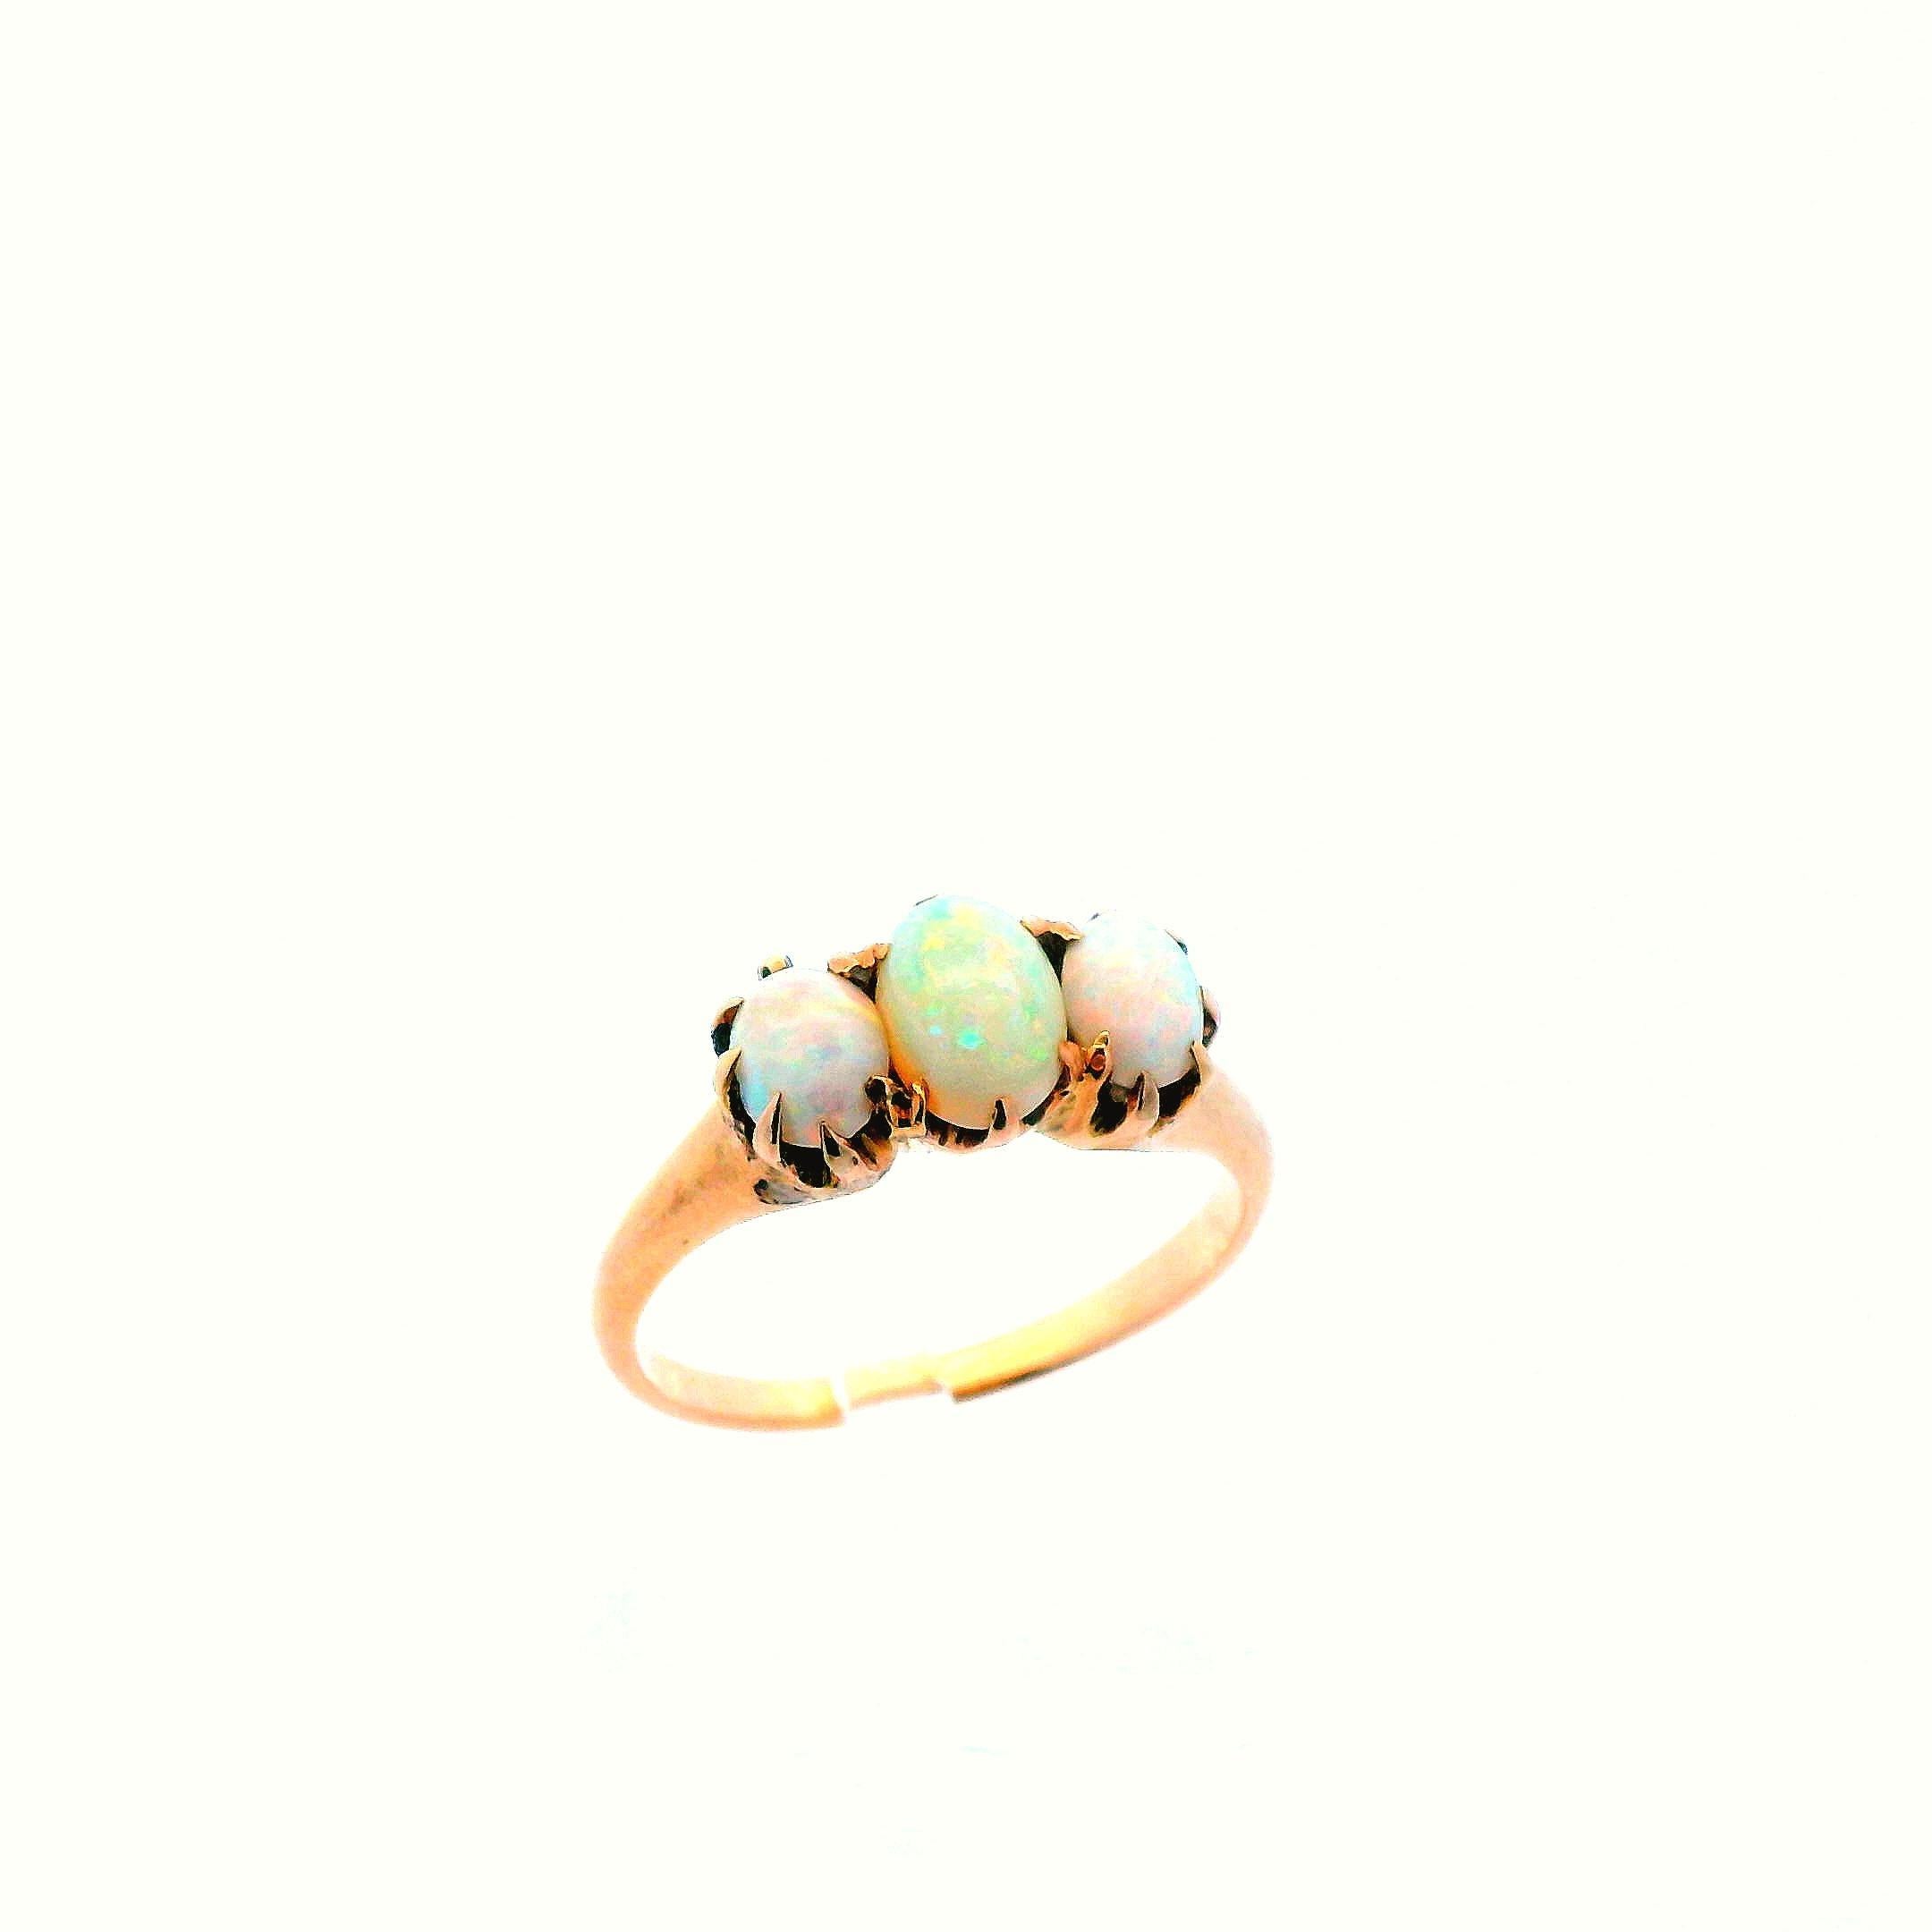 1910 Edwardian 14K Yellow Gold and Opal Ring For Sale 3